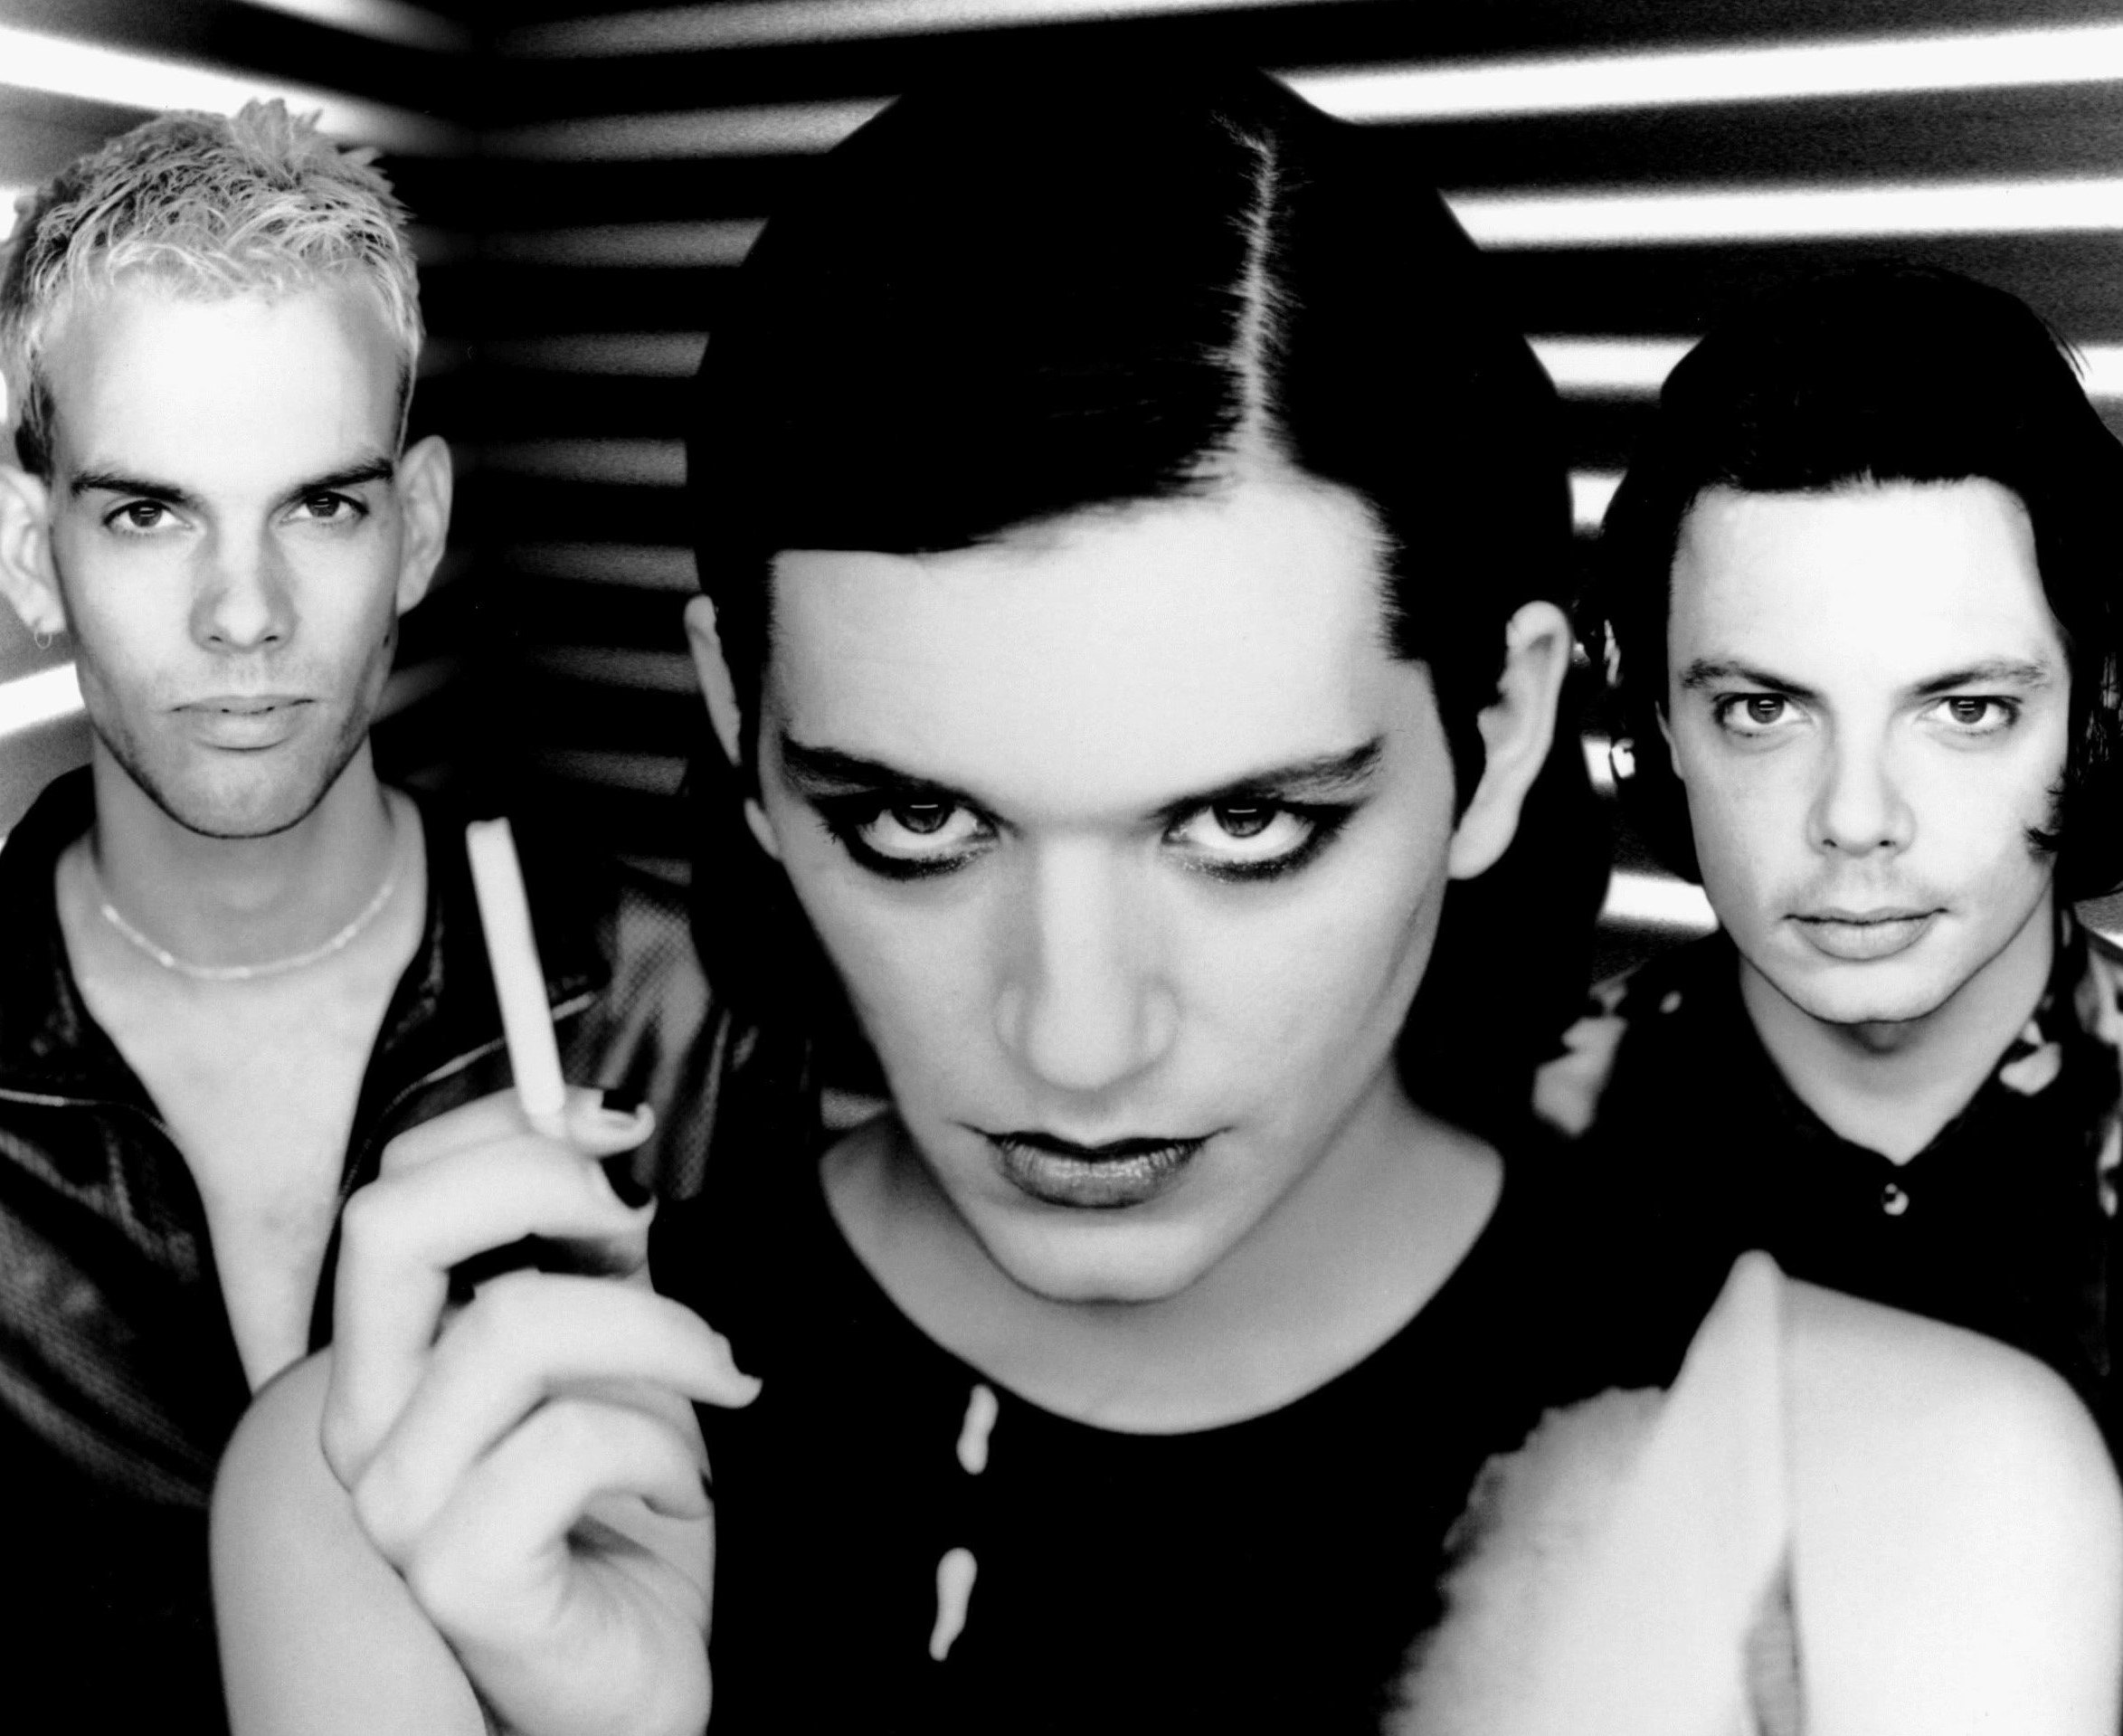 placebo26AB3D46 9BEE A919 8BEE 5E02F856DBDB